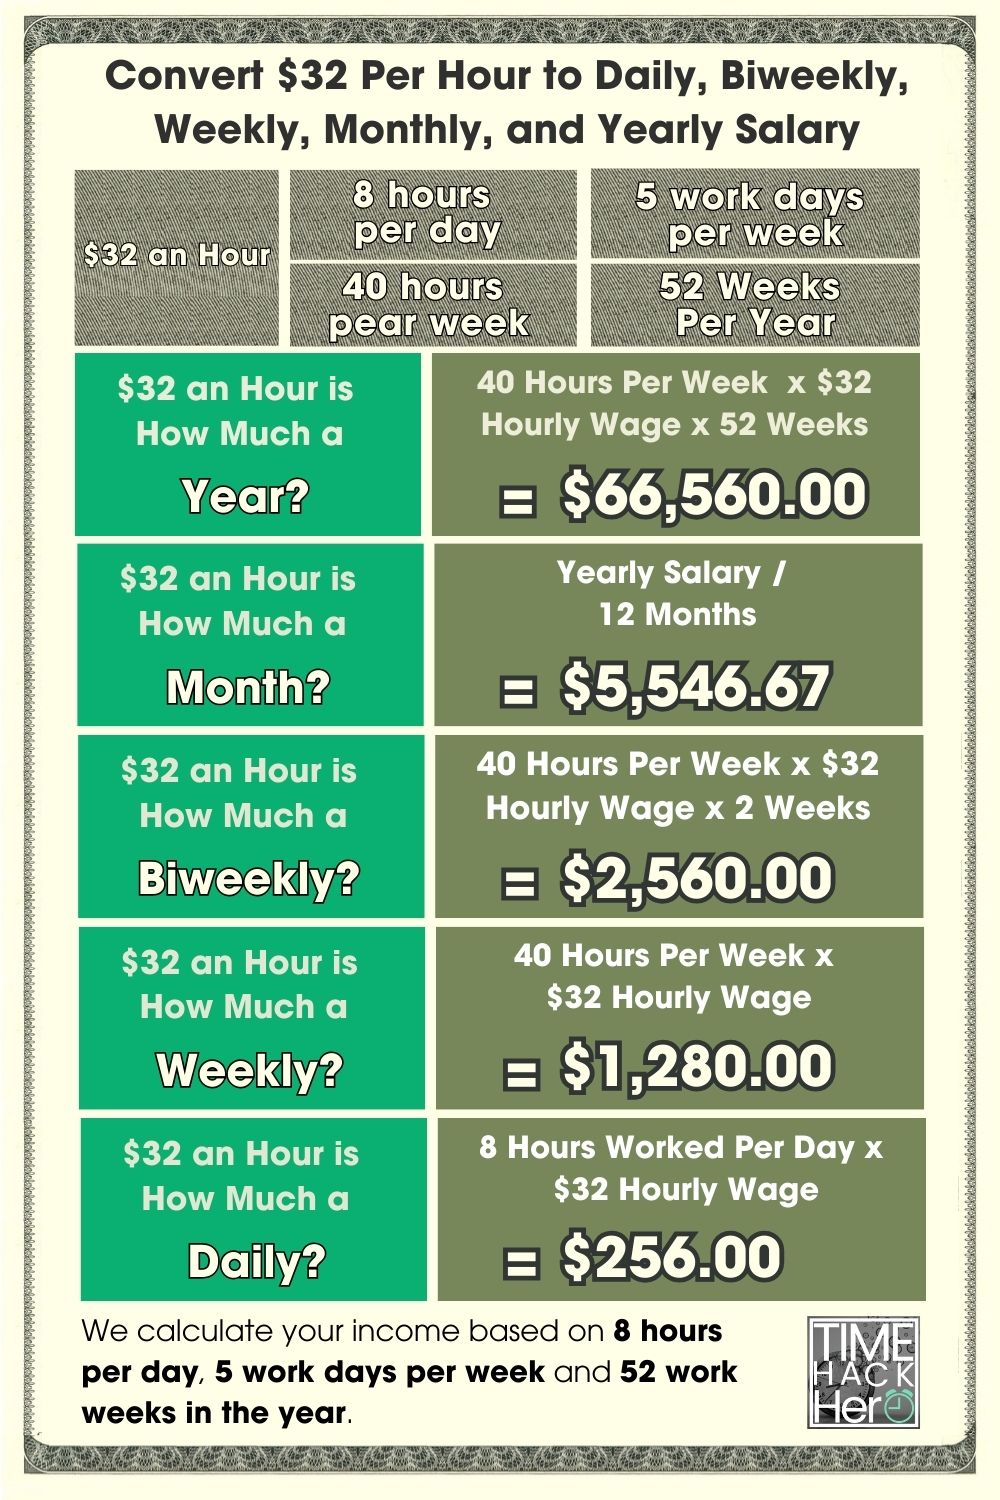 Convert $32 Per Hour to Daily, Biweekly, Weekly, Monthly, and Yearly Salary